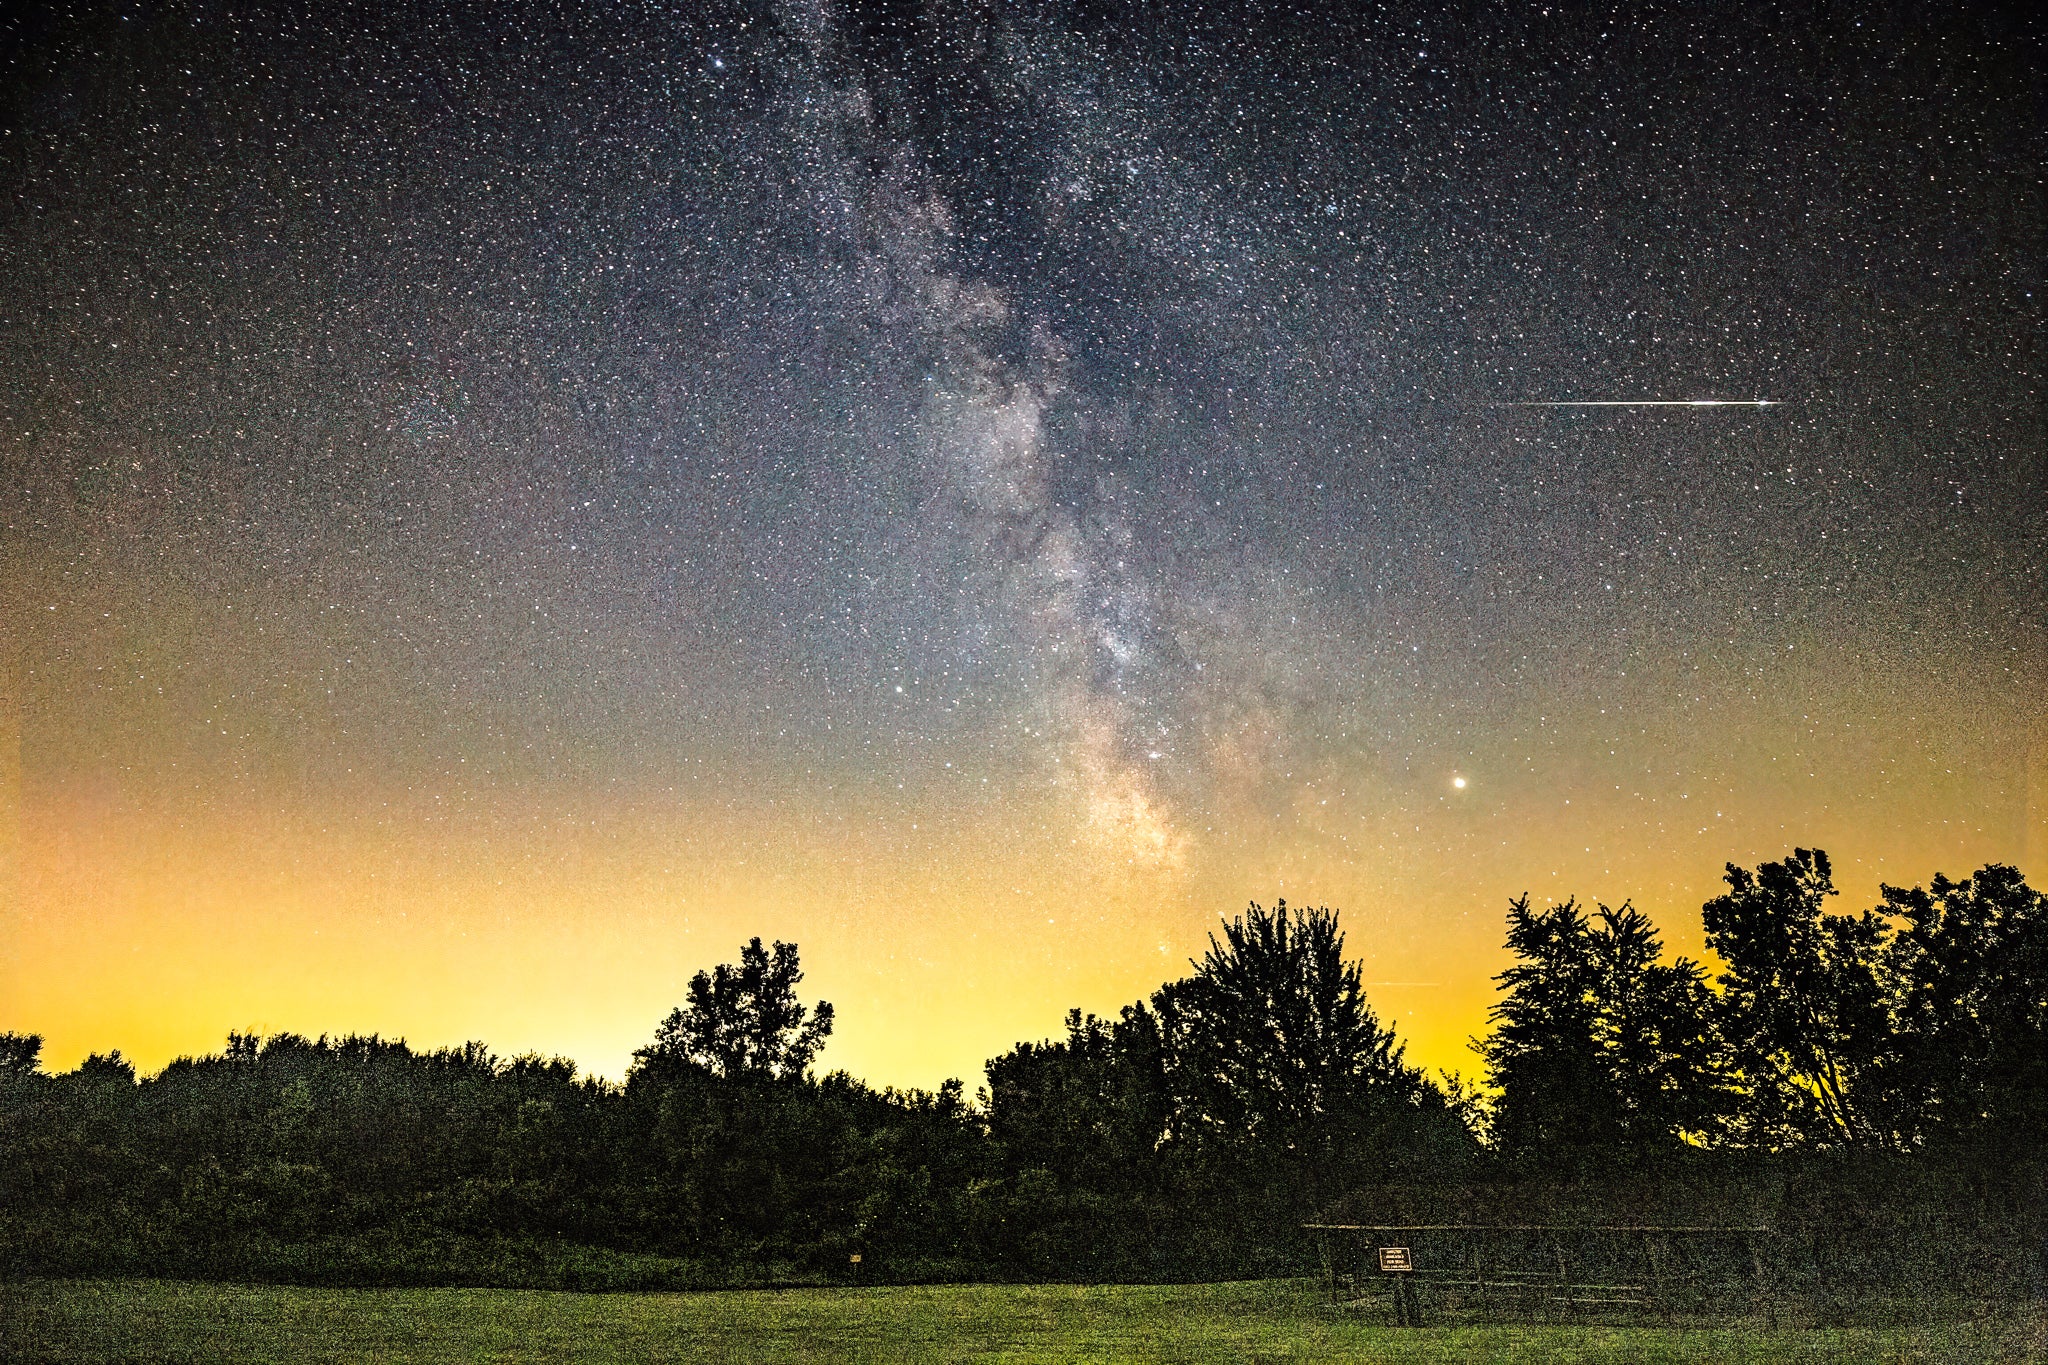 A chance meteor appears in this nightscape taken from the dark-sky preserve at Lake Hudson in Michigan. This shot is a single 20-second exposure taken at ISO 6400 with a Tamron 17–35mm lens at 17mm and f/2.8.